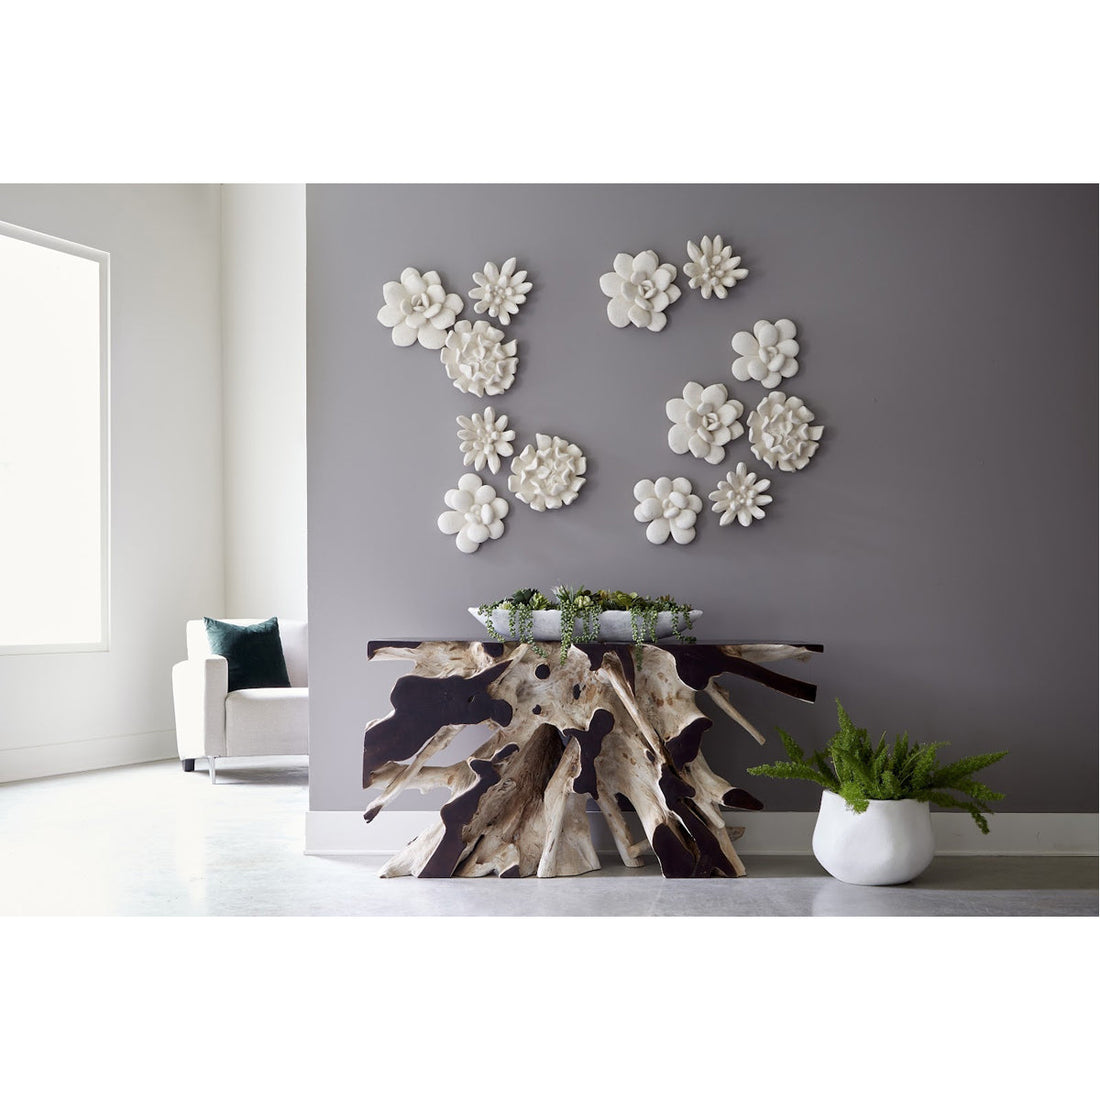 Phillips Collection Oviferum Succulent Outdoor Wall Art